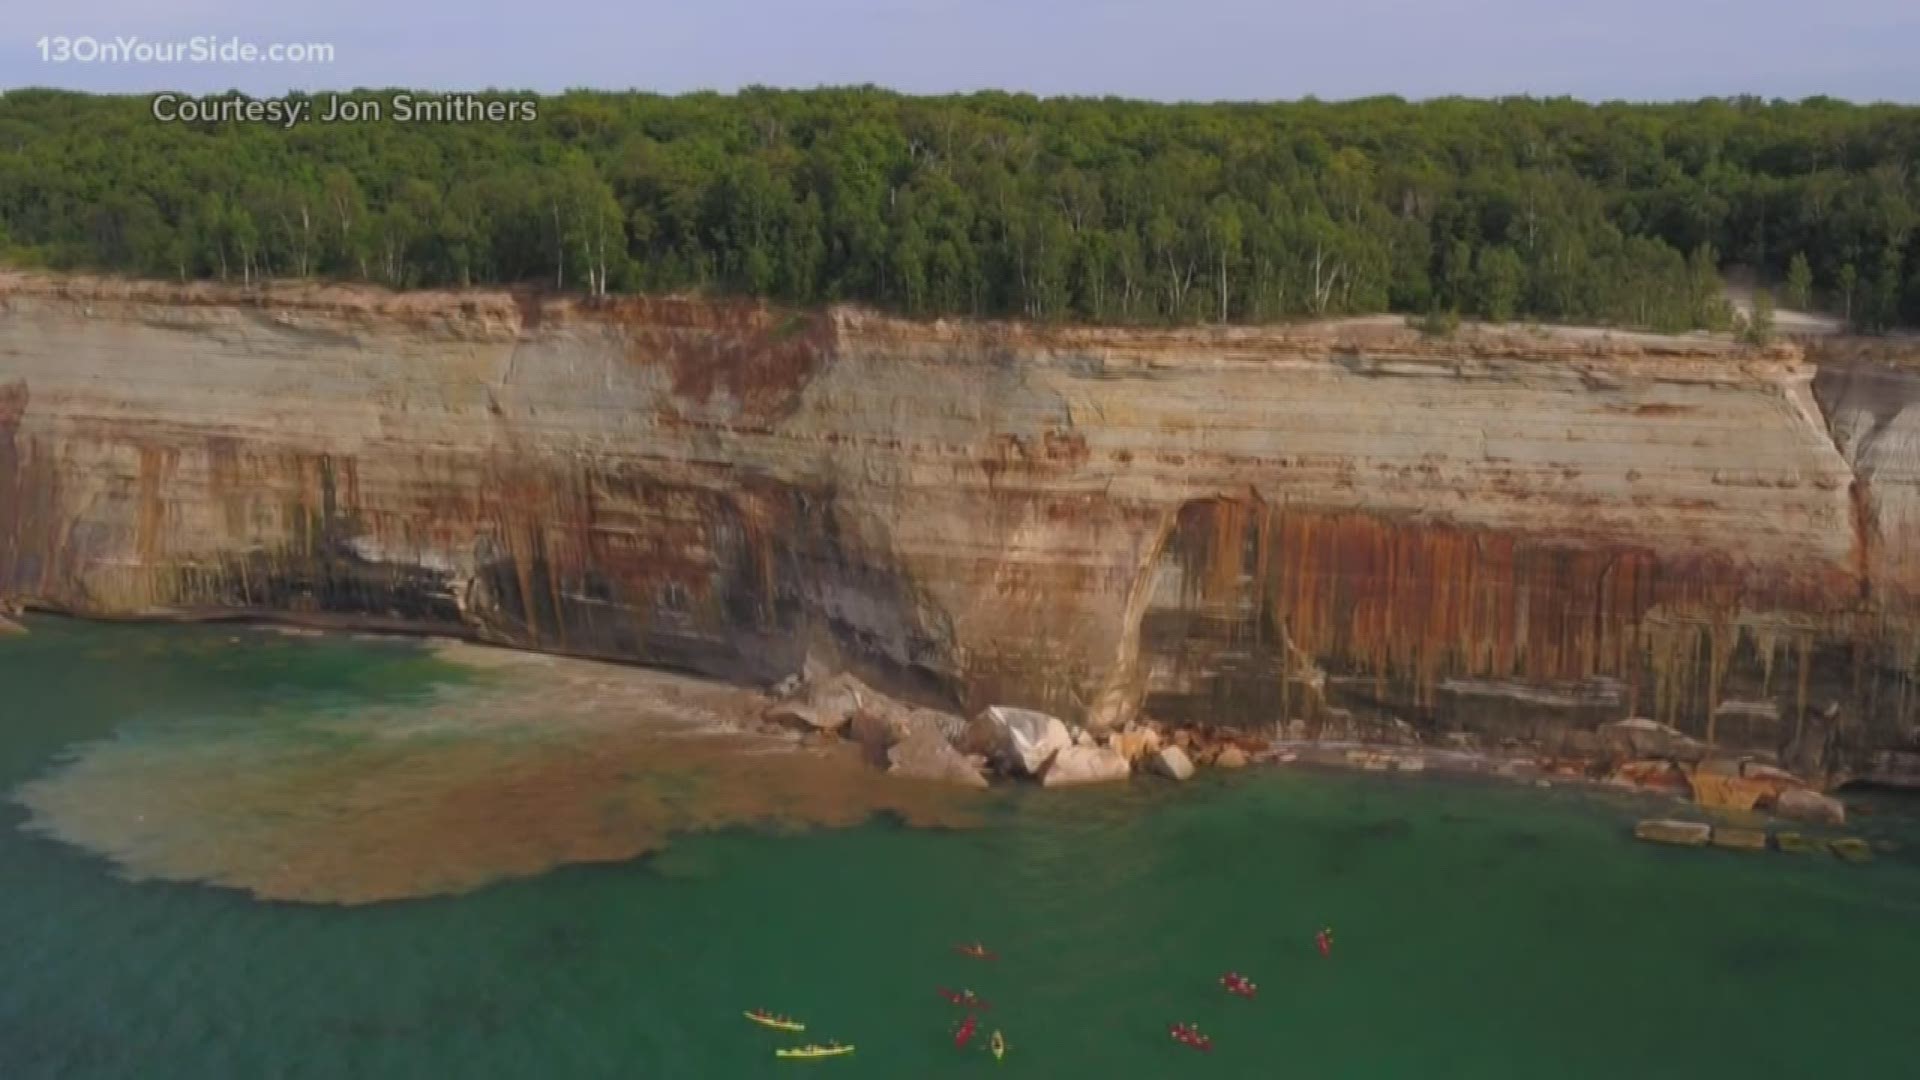 Kayakers on a tour of Pictured Rocks National Lakeshore in northern Michigan narrowly escaped injury when a large section of cliff collapsed near them into Lake Superior.